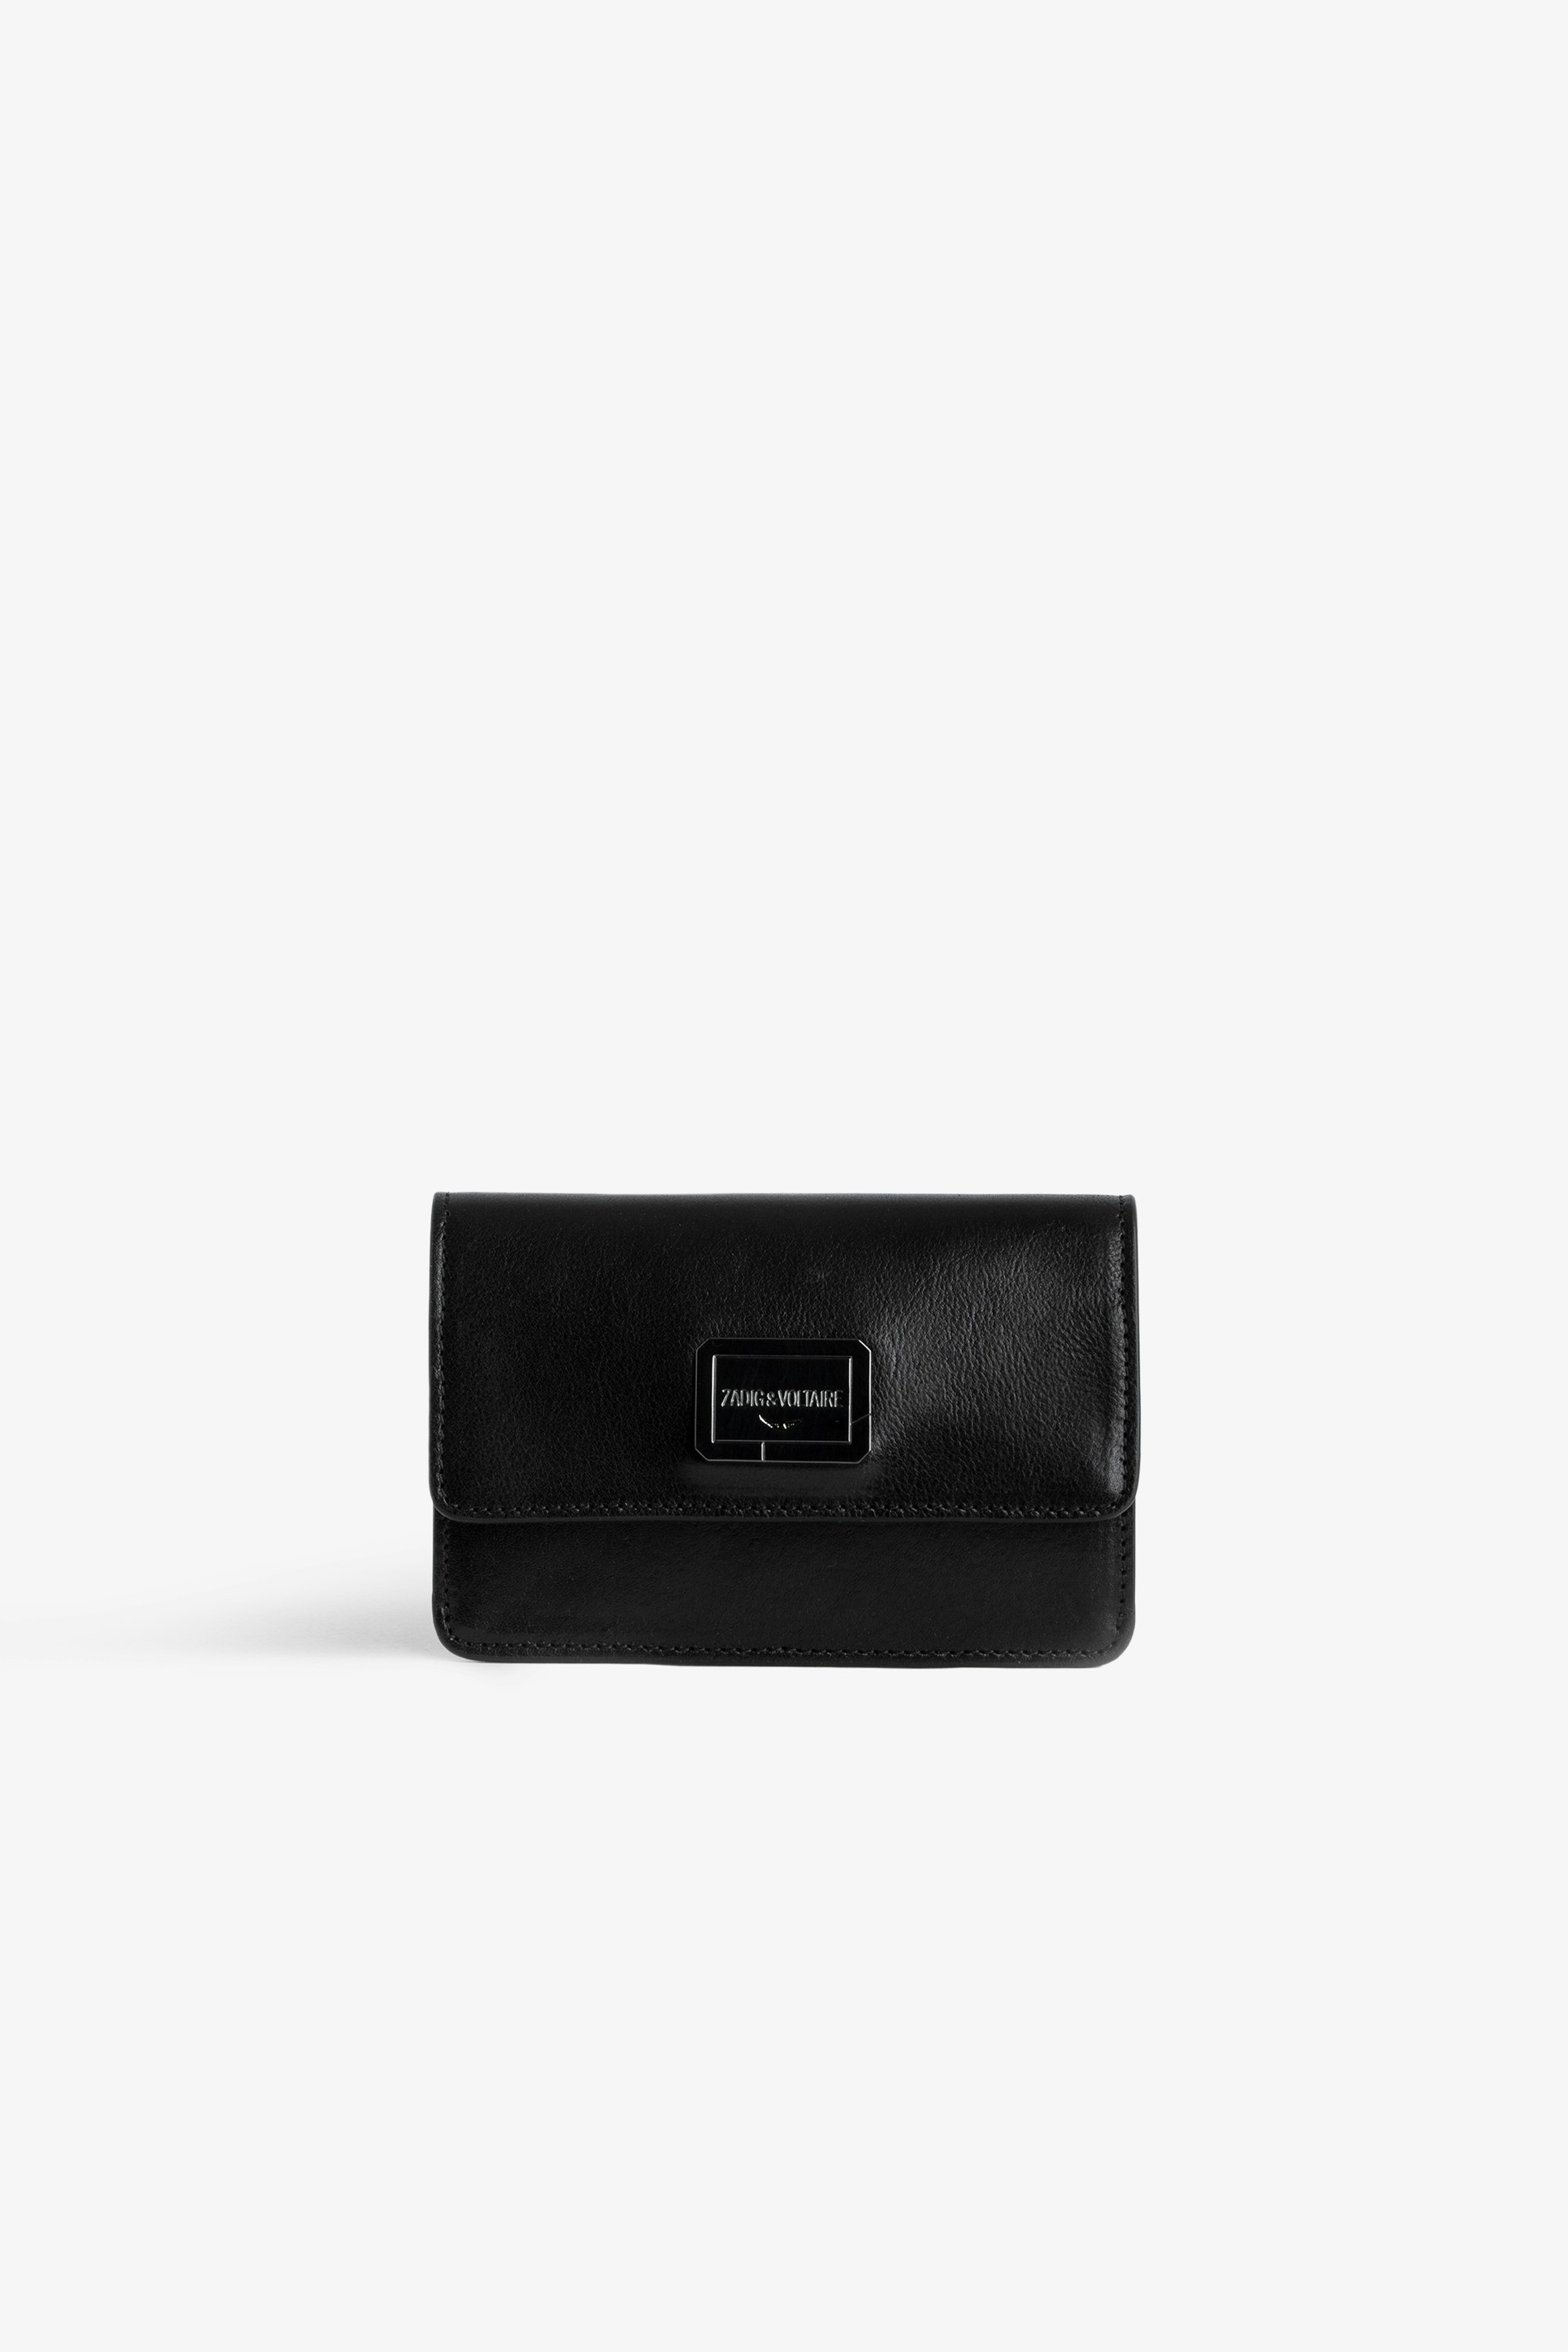 Le Cecilia Wallet Women's black leather wallet with flap.